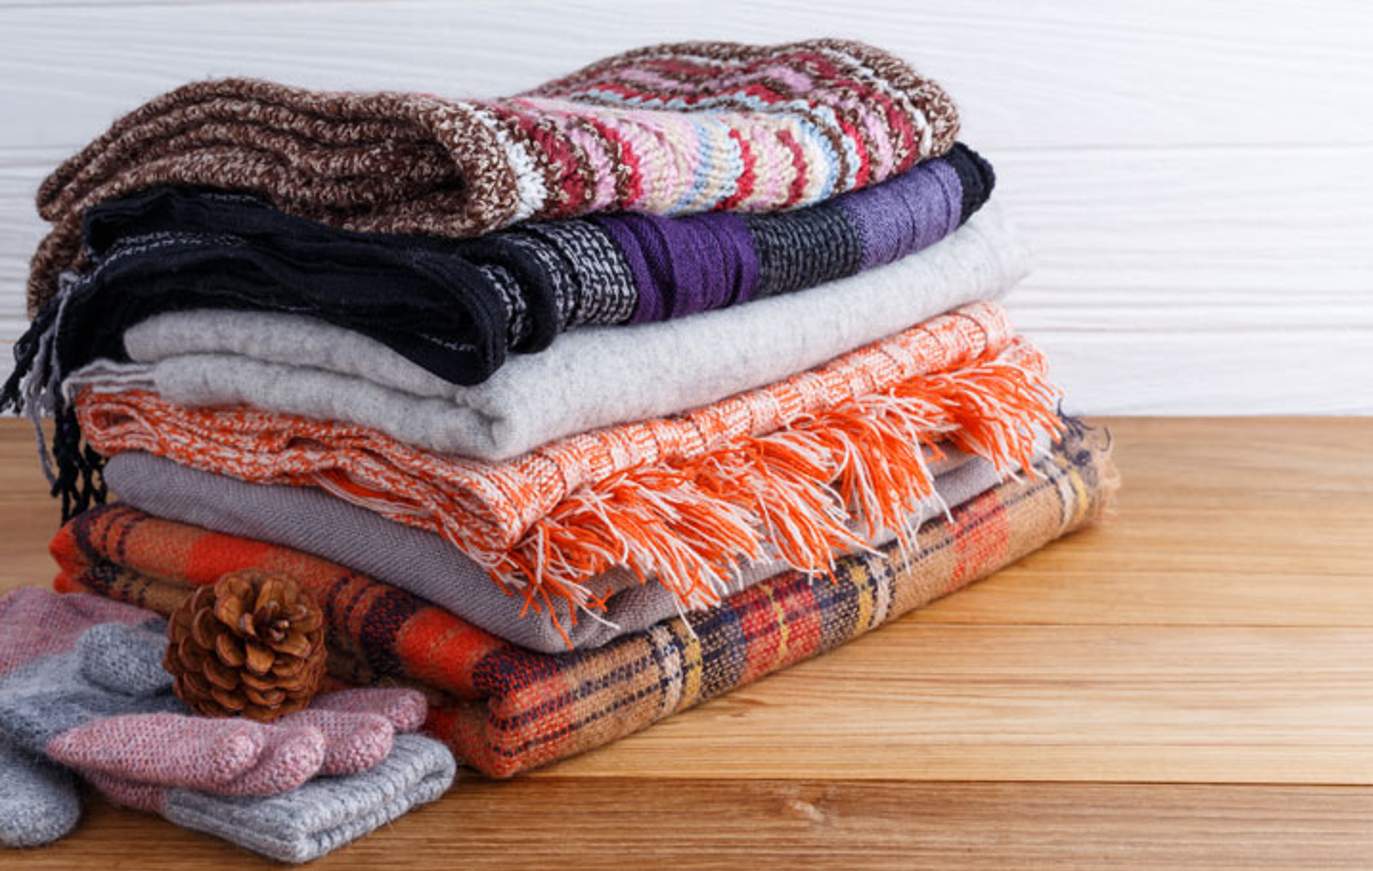 How to Clean Quilt or Blanket Before using in Winter